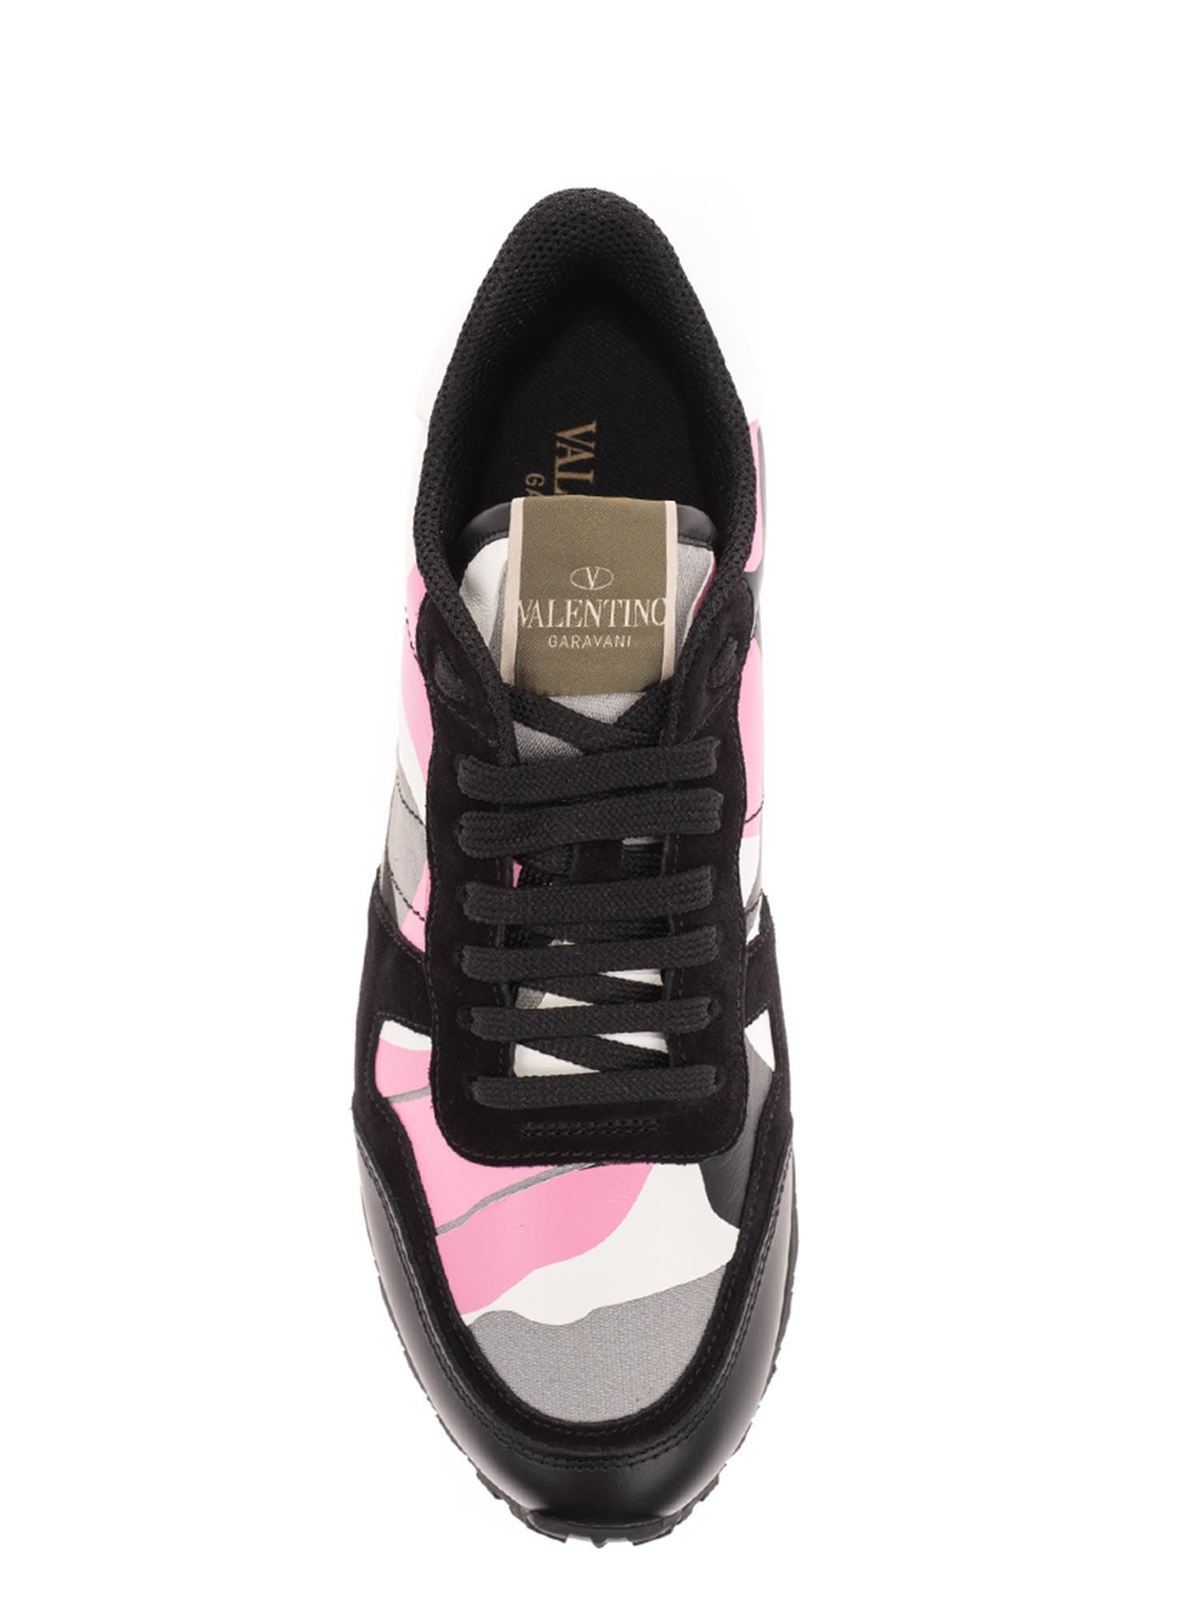 green and pink valentino trainers